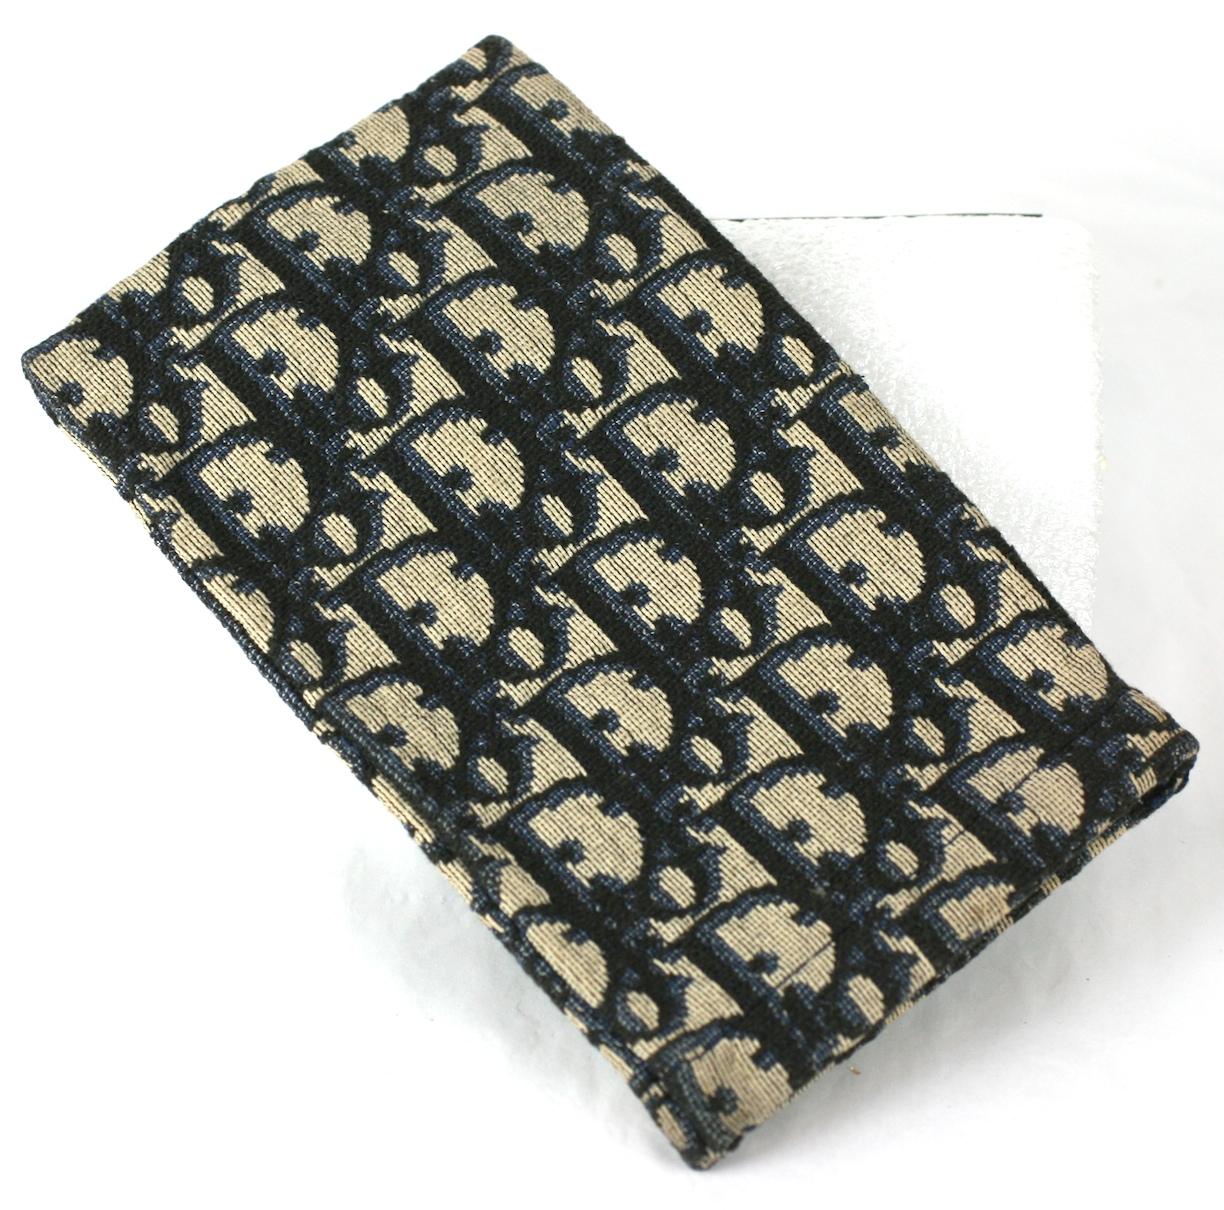 Vintage Christian Dior textile eye glass case of woven grey beige and navy, signature Trotter logo print. 
1980's France.  Excellent Condition. 
Length 6.50